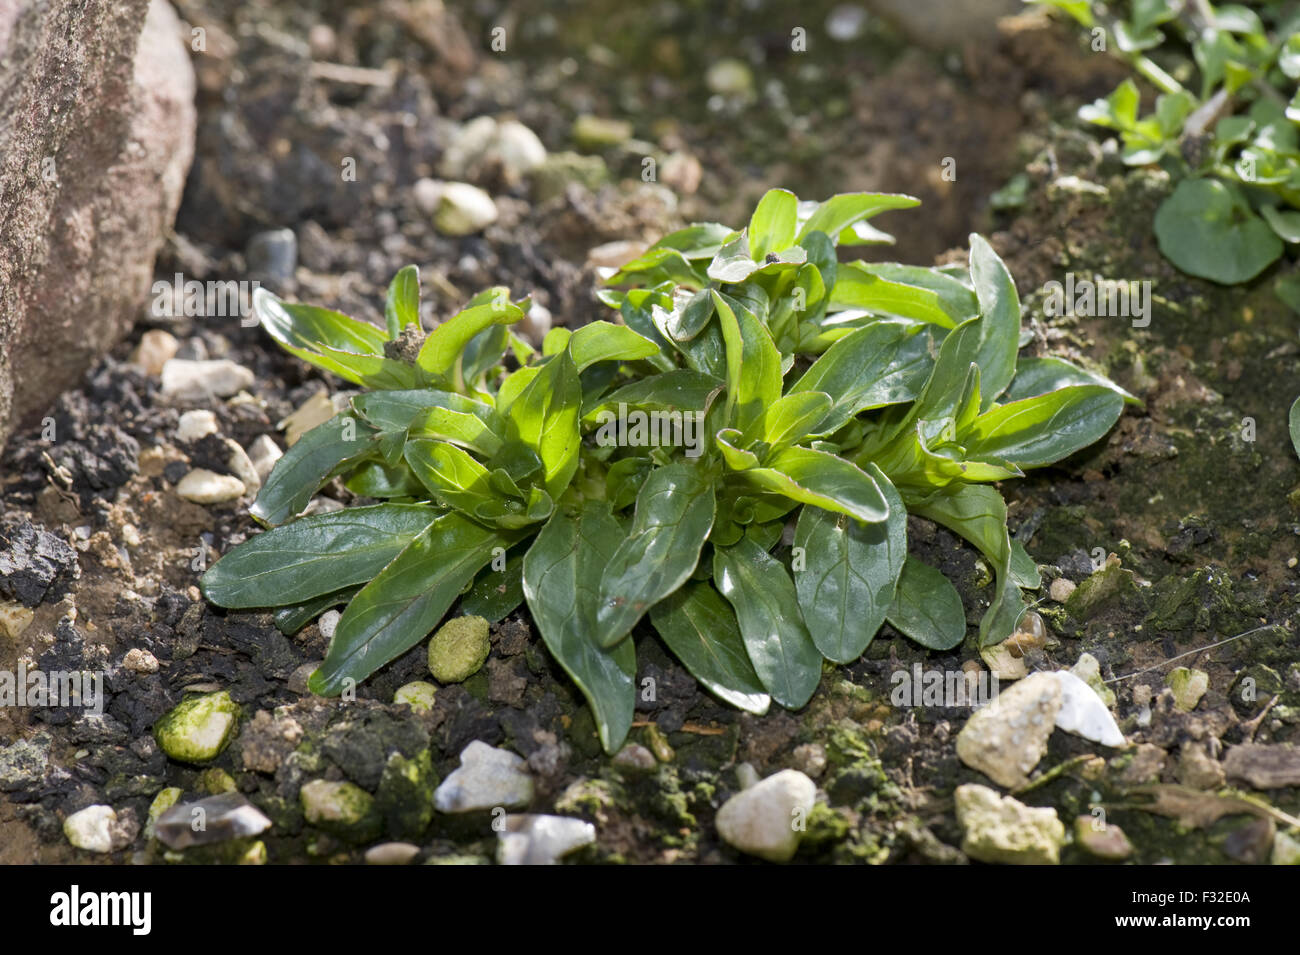 Broad-leaved Willowherb, Epilobium montanum, young plant in a garden rockery, Berkshire, England, March Stock Photo